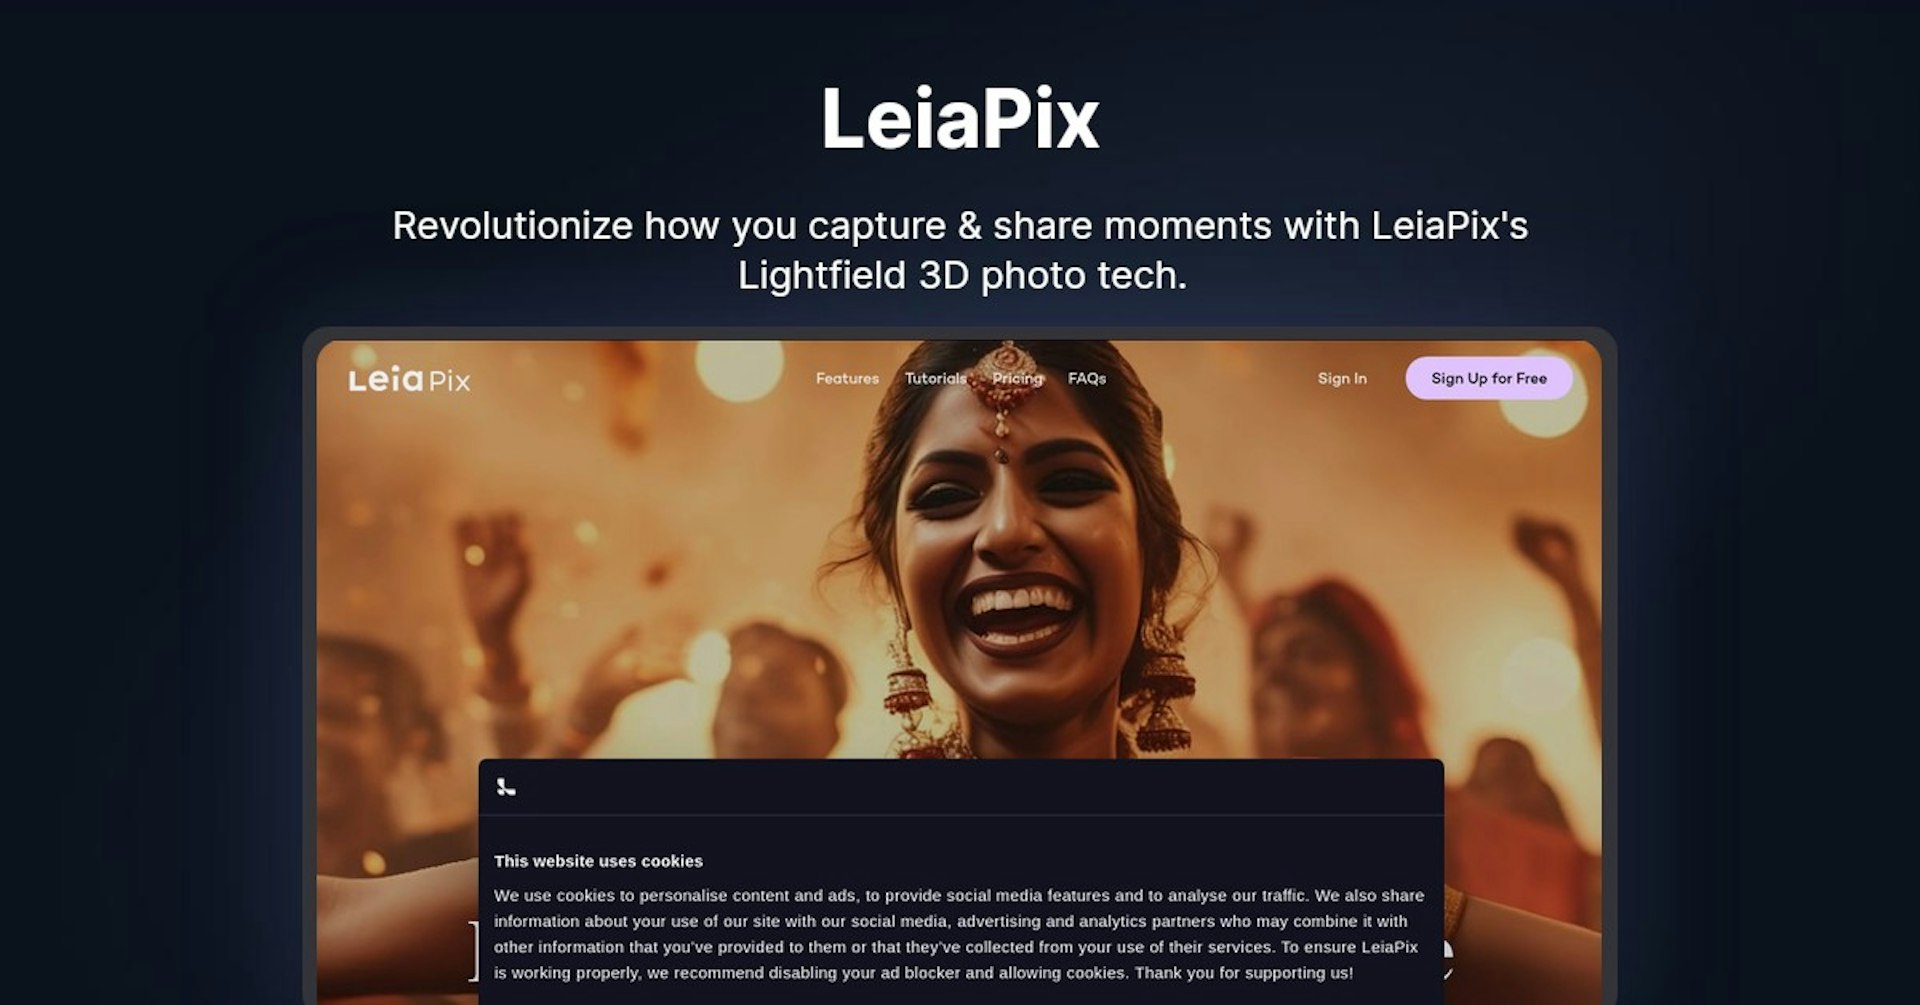 LeiaPix: AI-Powered App for Creating & Sharing 3D Photos